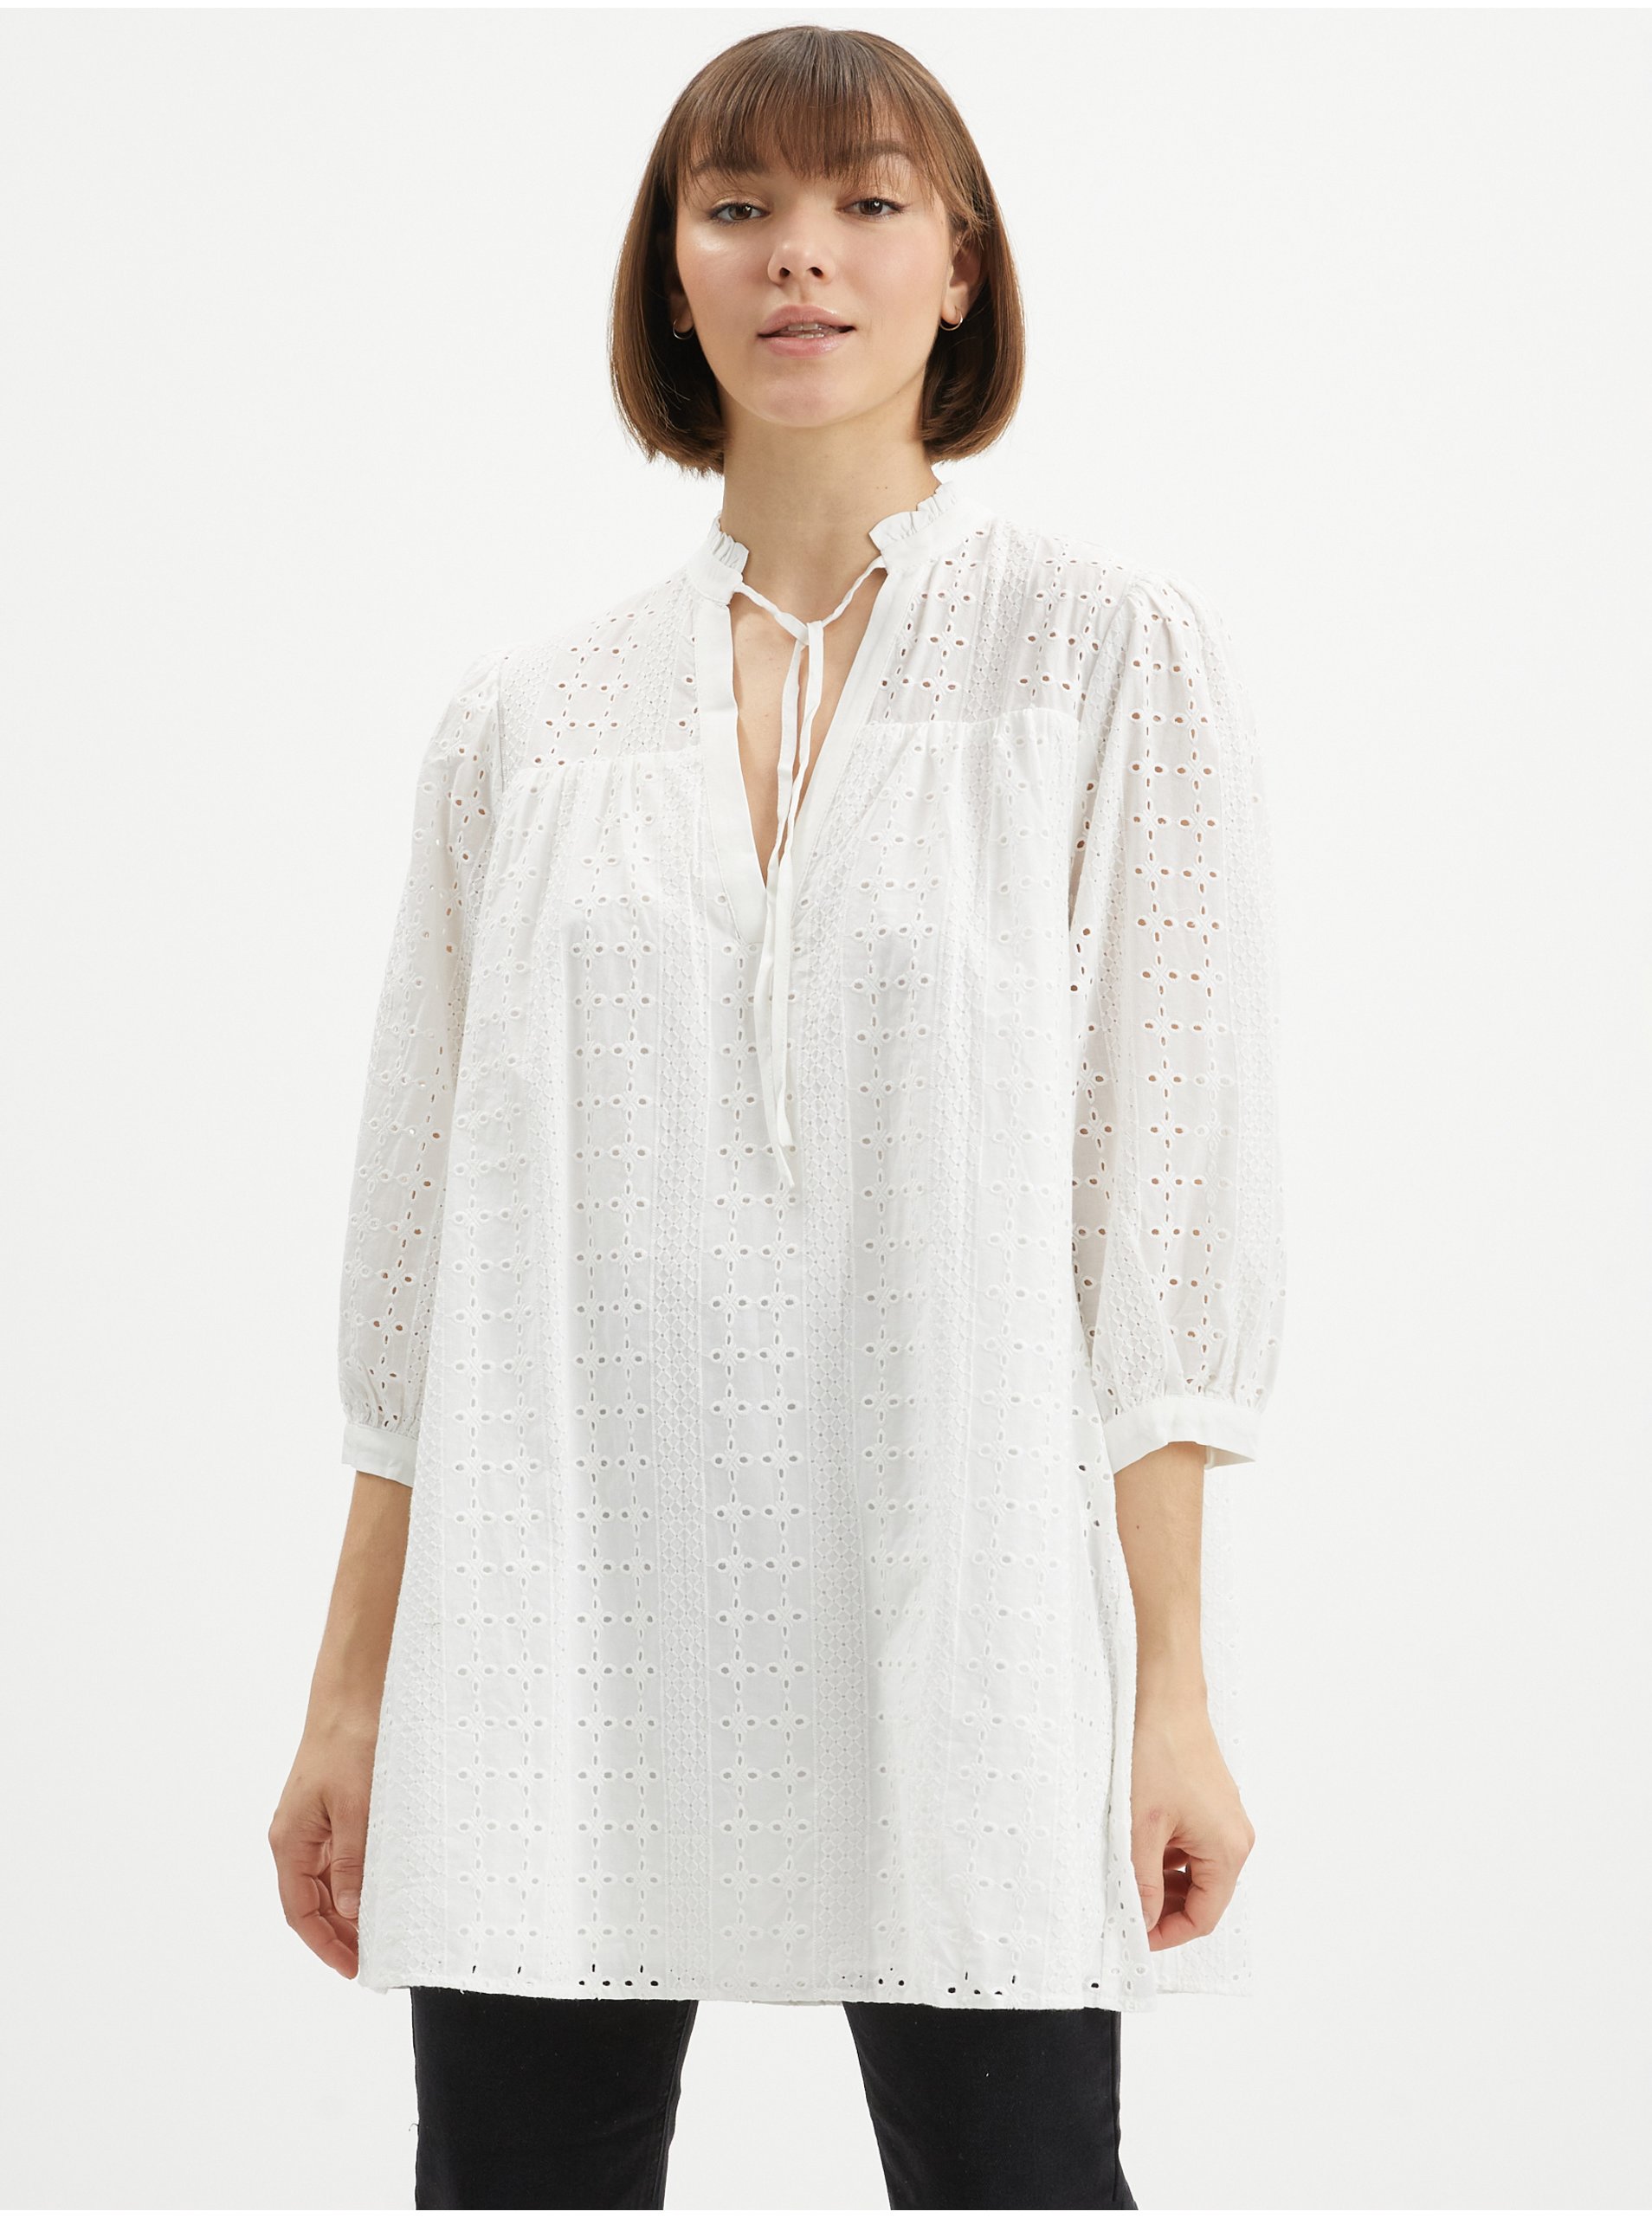 White long blouse with madeira . OBJECT Inja - Ladies